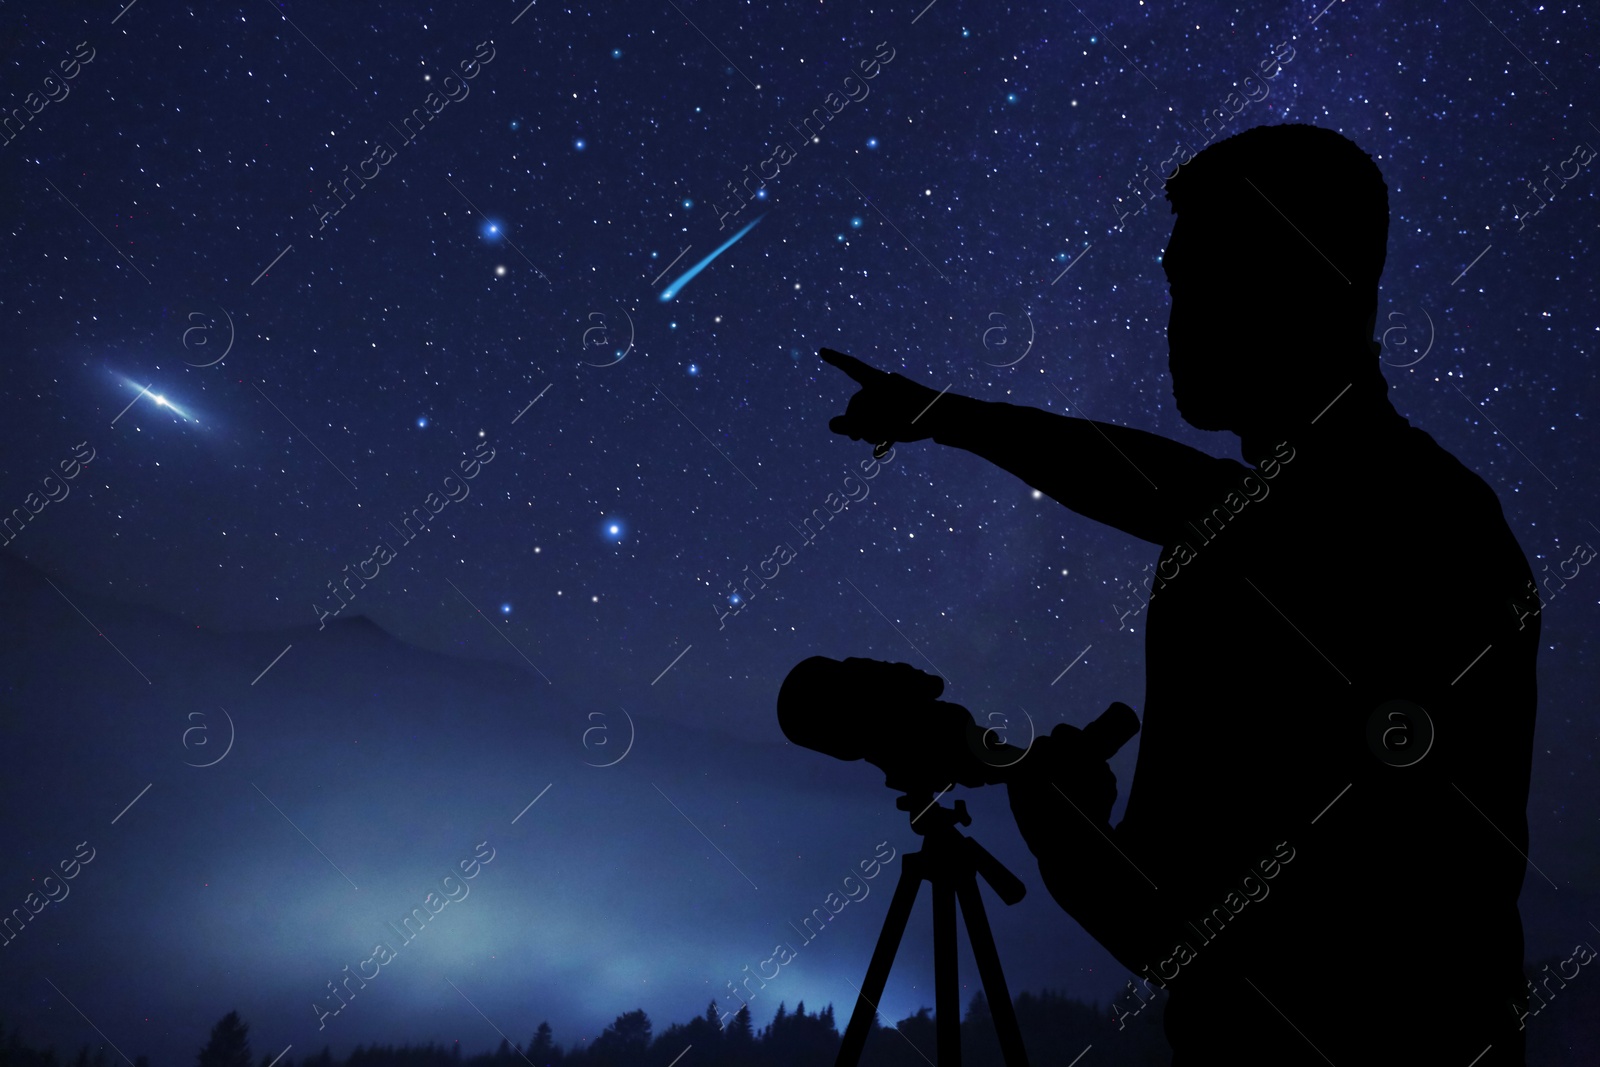 Image of Astronomer with telescope pointing at shooting star outdoors